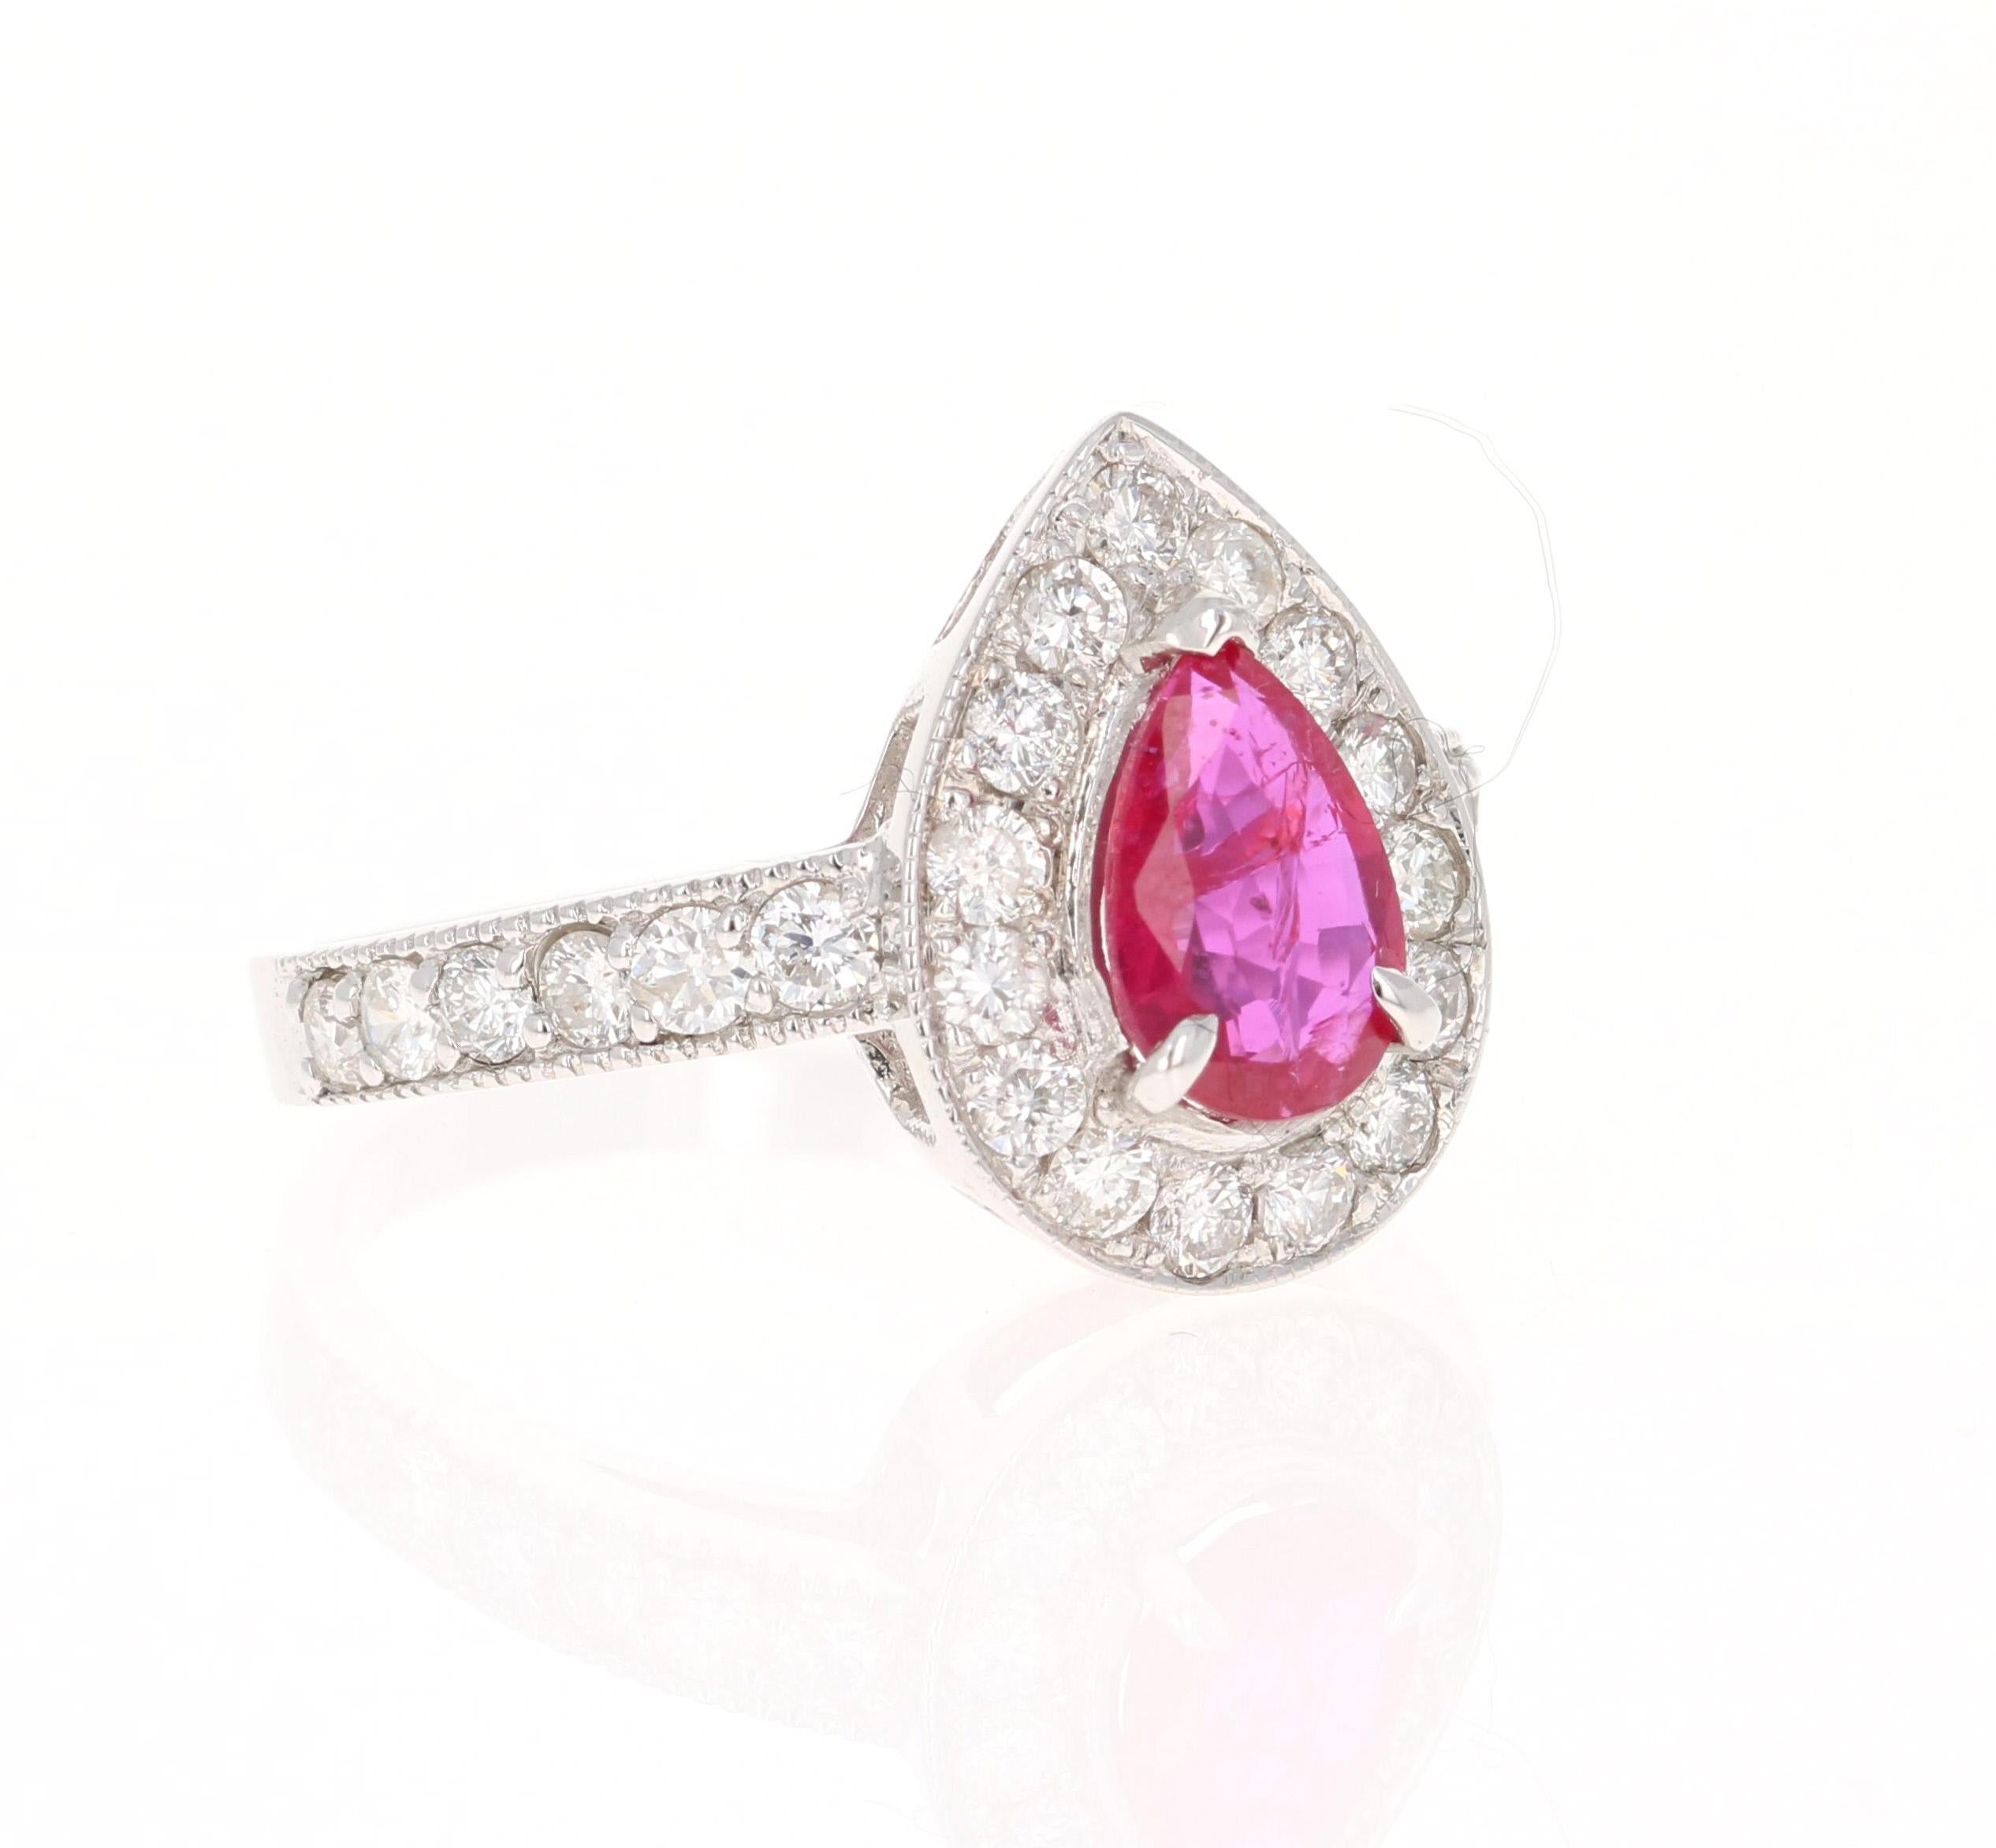 Gorgeous GIA Certified Pear Cut Ruby from Mozambique weighs 1.10 carats and has NO HEAT. The GIA Certificate number is: 2193125529 and can be verified on the GIA website. The certificate will be included with the ring. The measurements of the Ruby